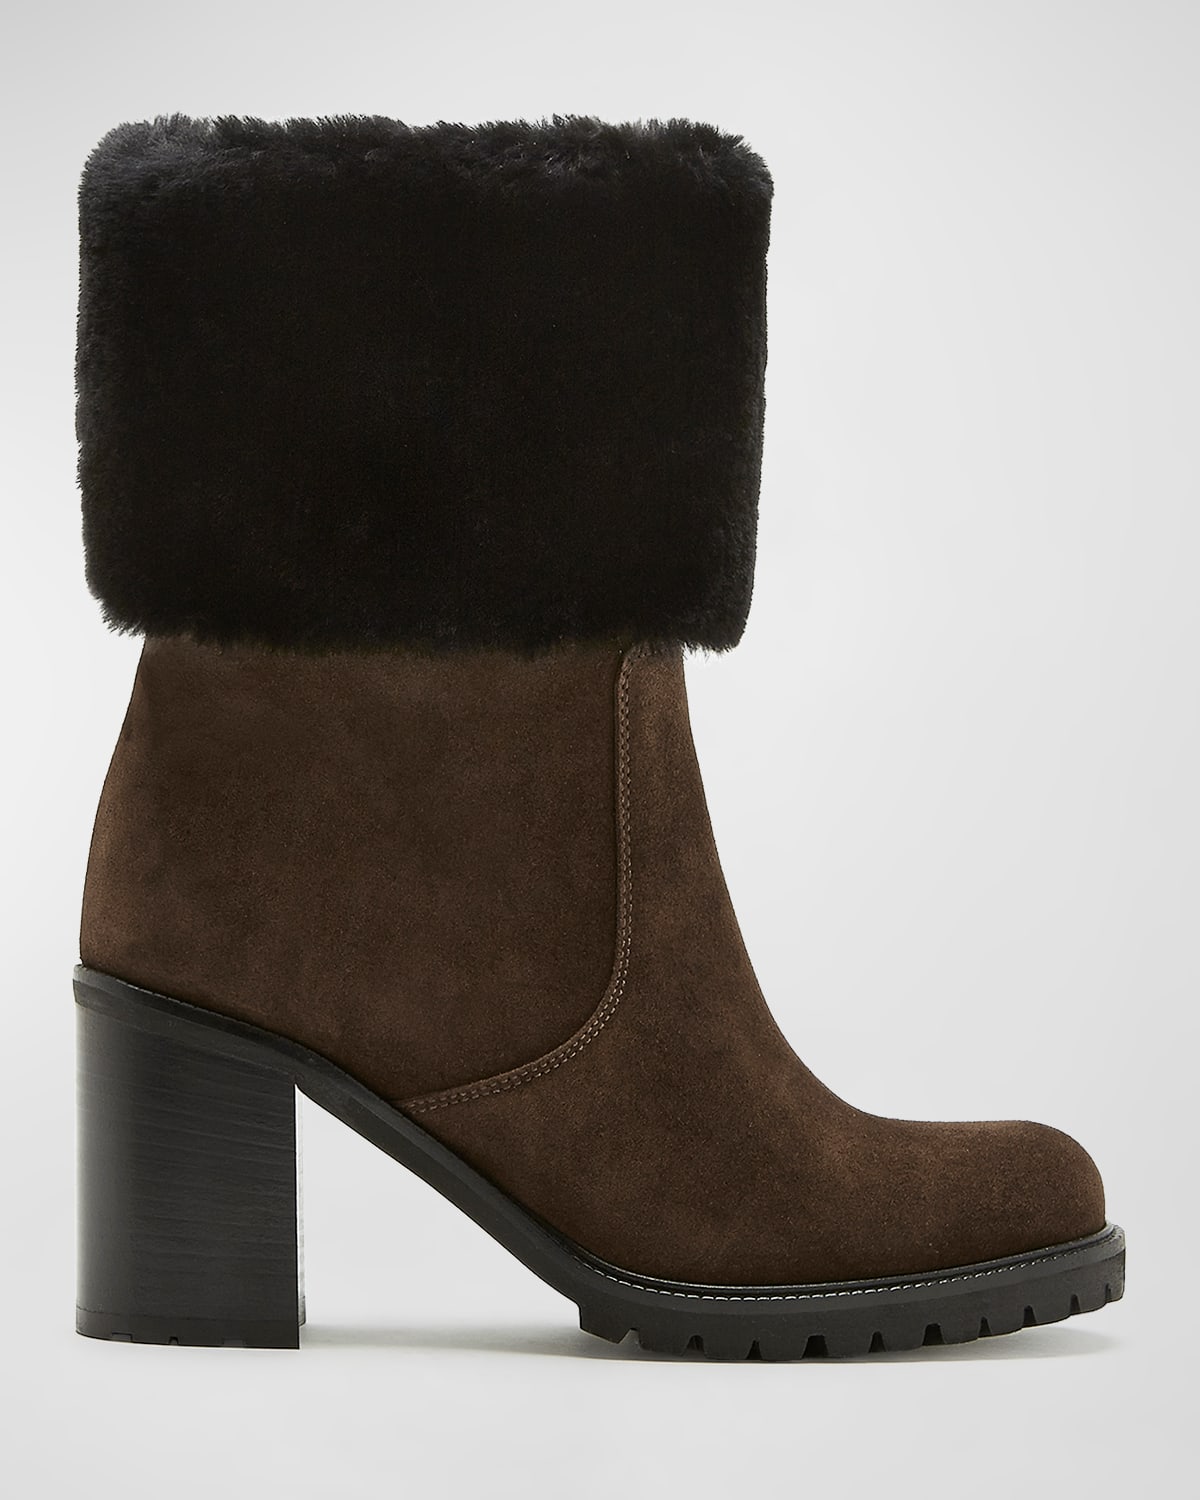 La Canadienne Paulina Suede Shearling Boots